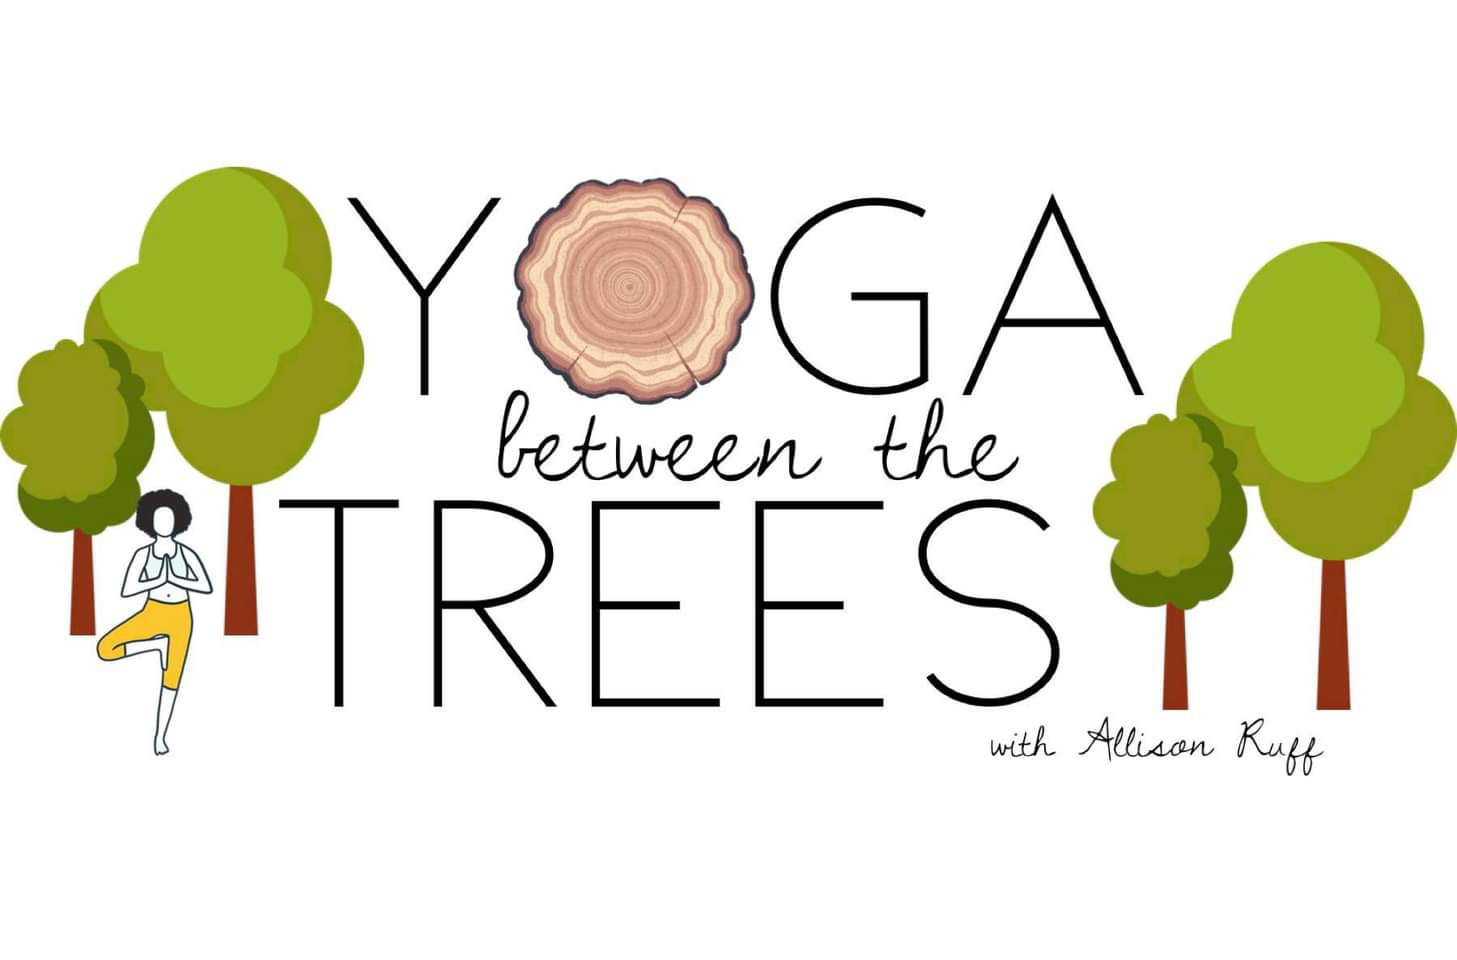 Yoga Between the Trees